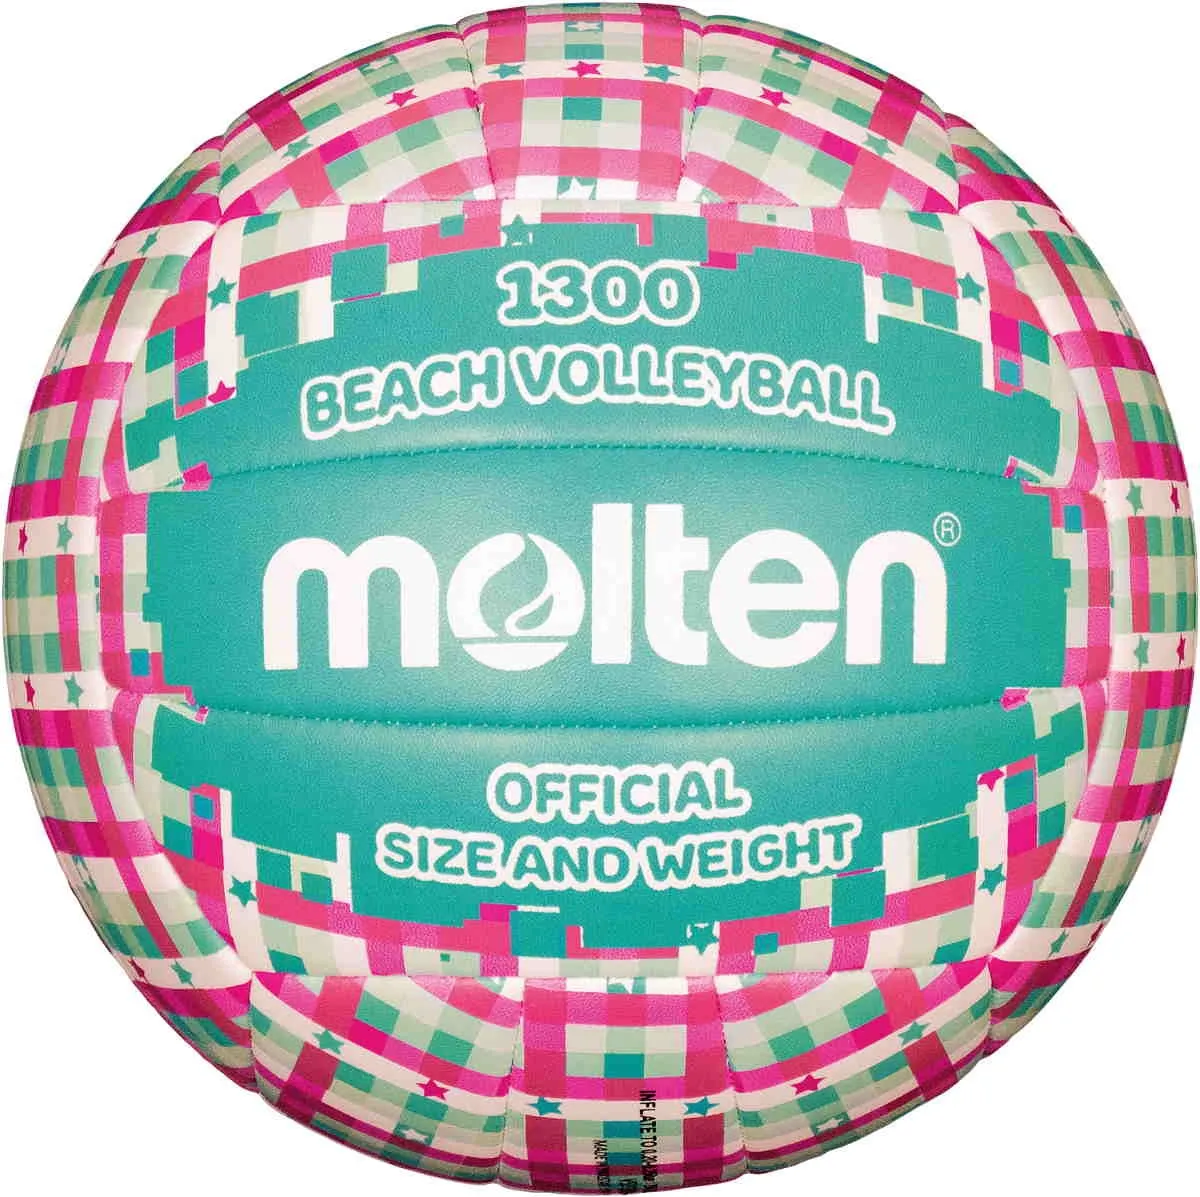 Beach volleyball turquoise/pink/white